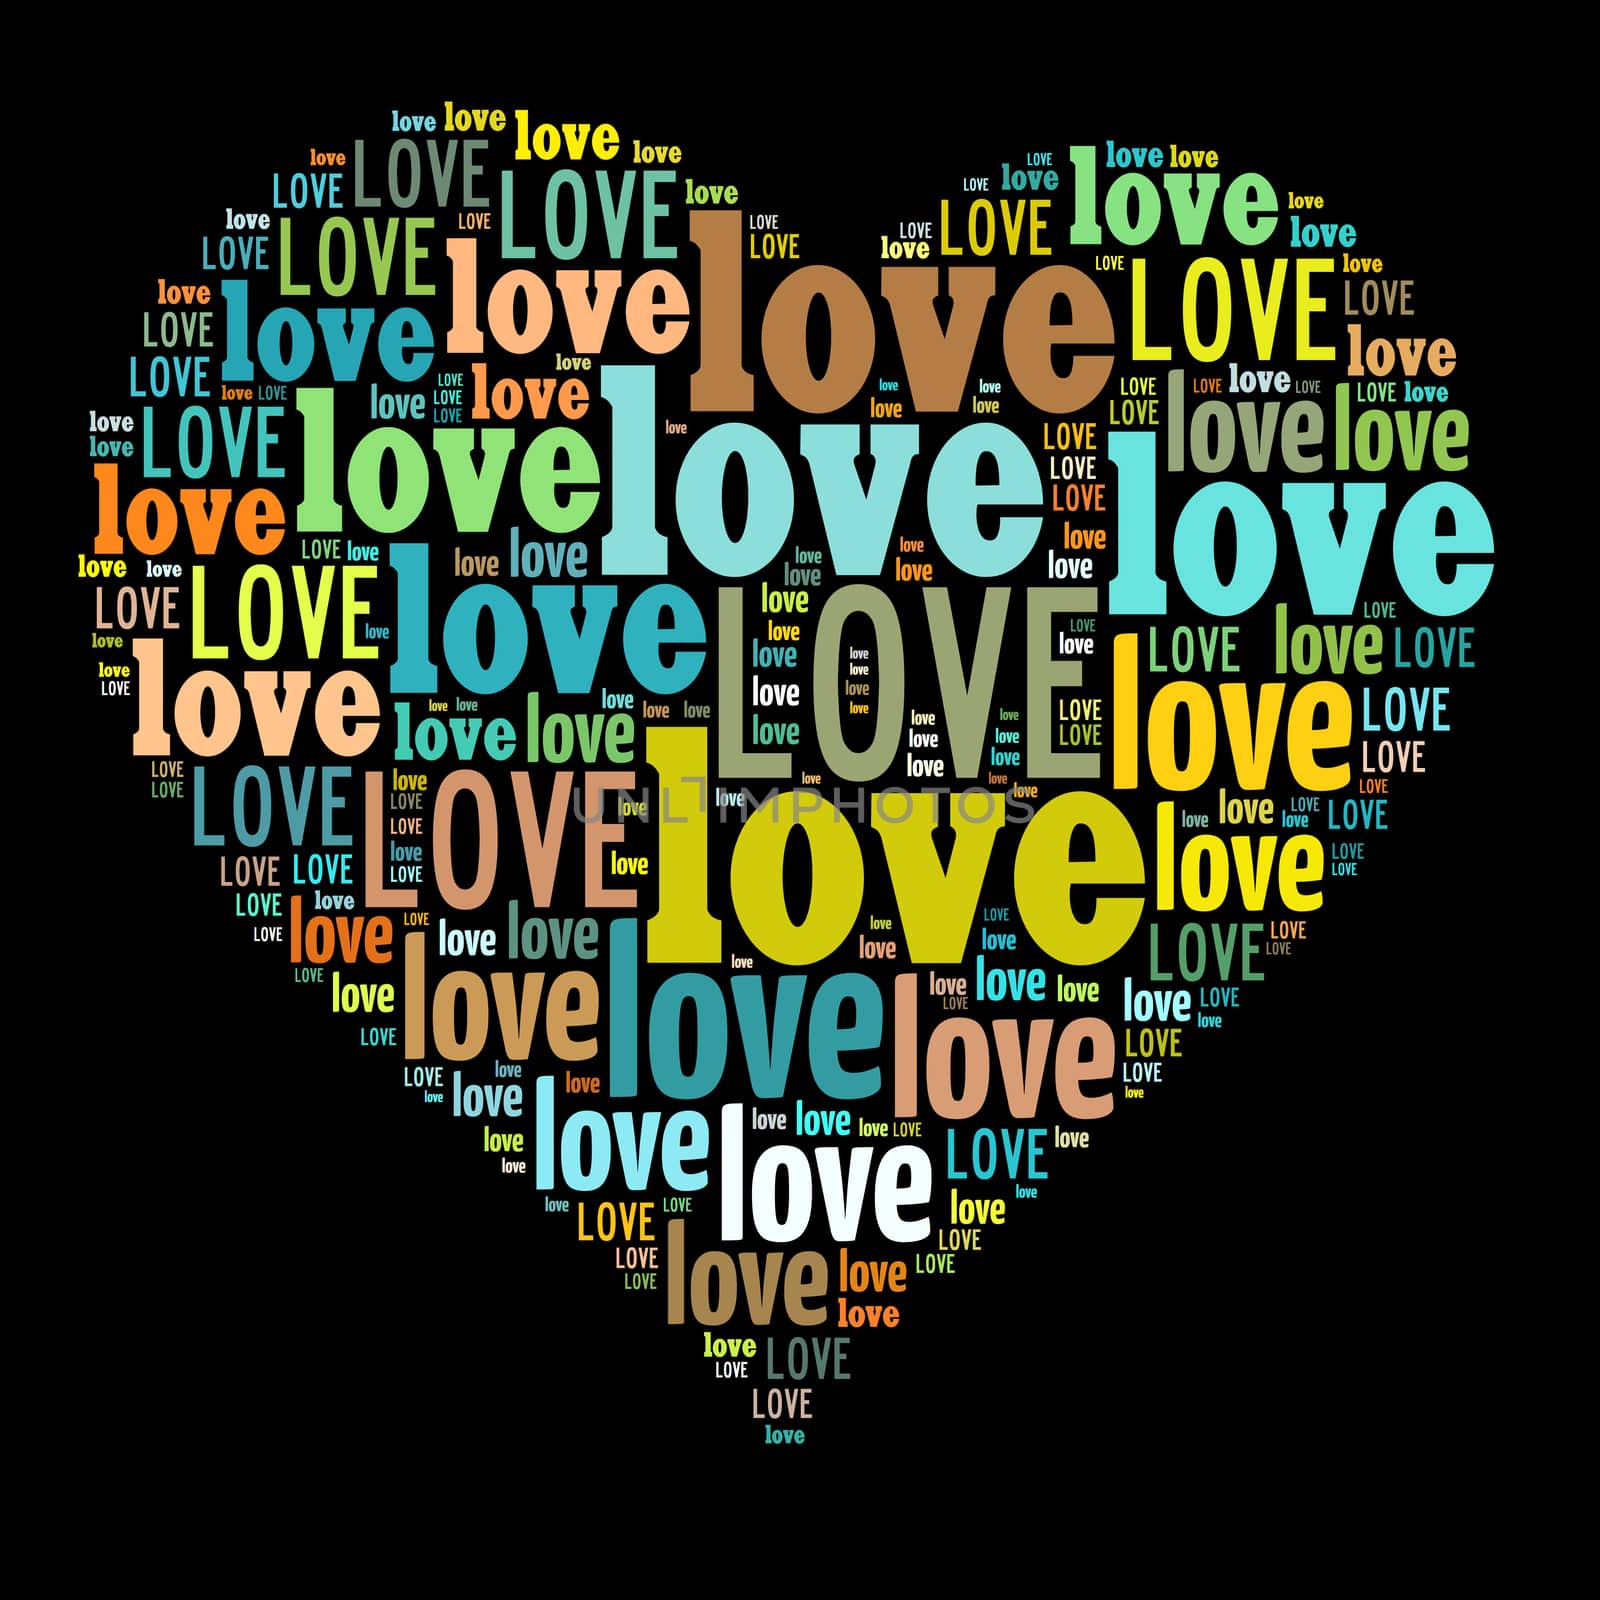 Valentines day card word cloud concept by eenevski